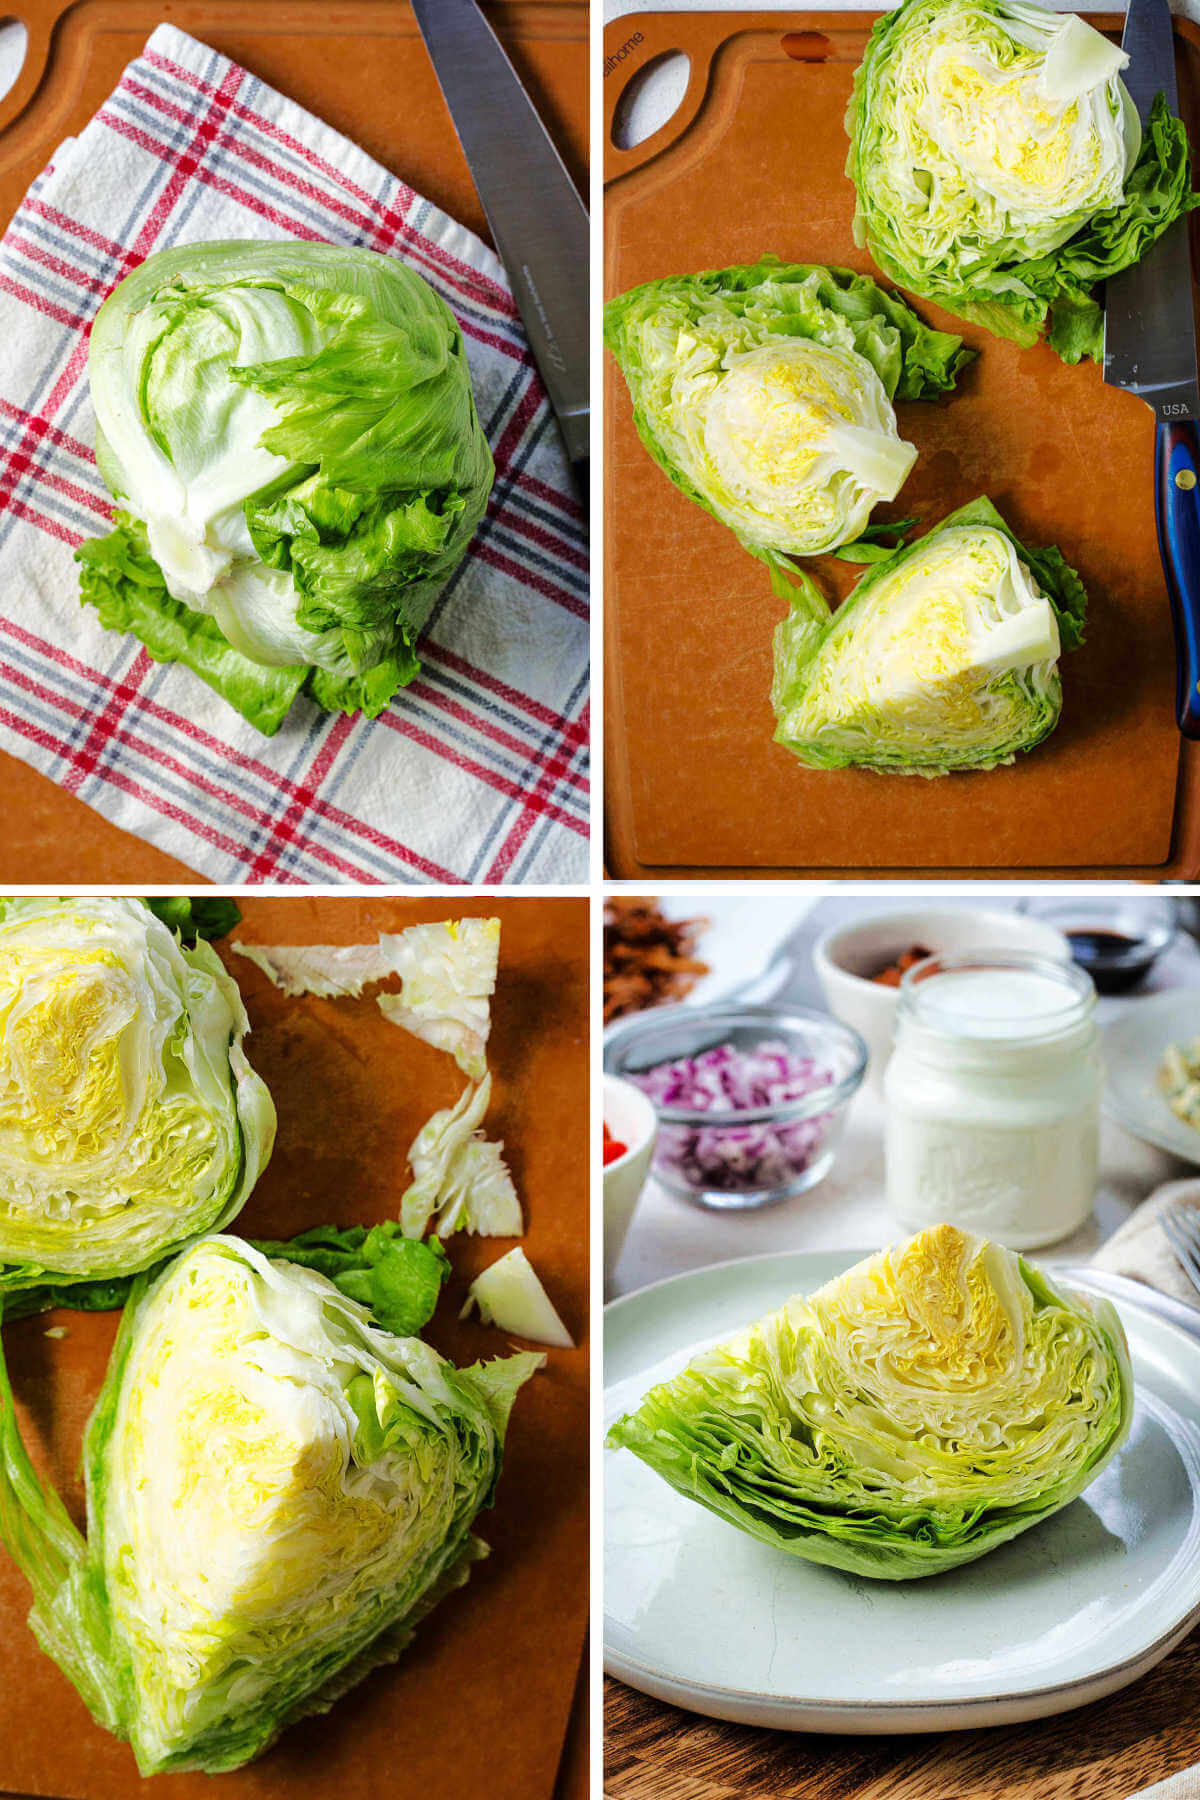 Cutting a head of iceberg lettuce into wedges for salads.